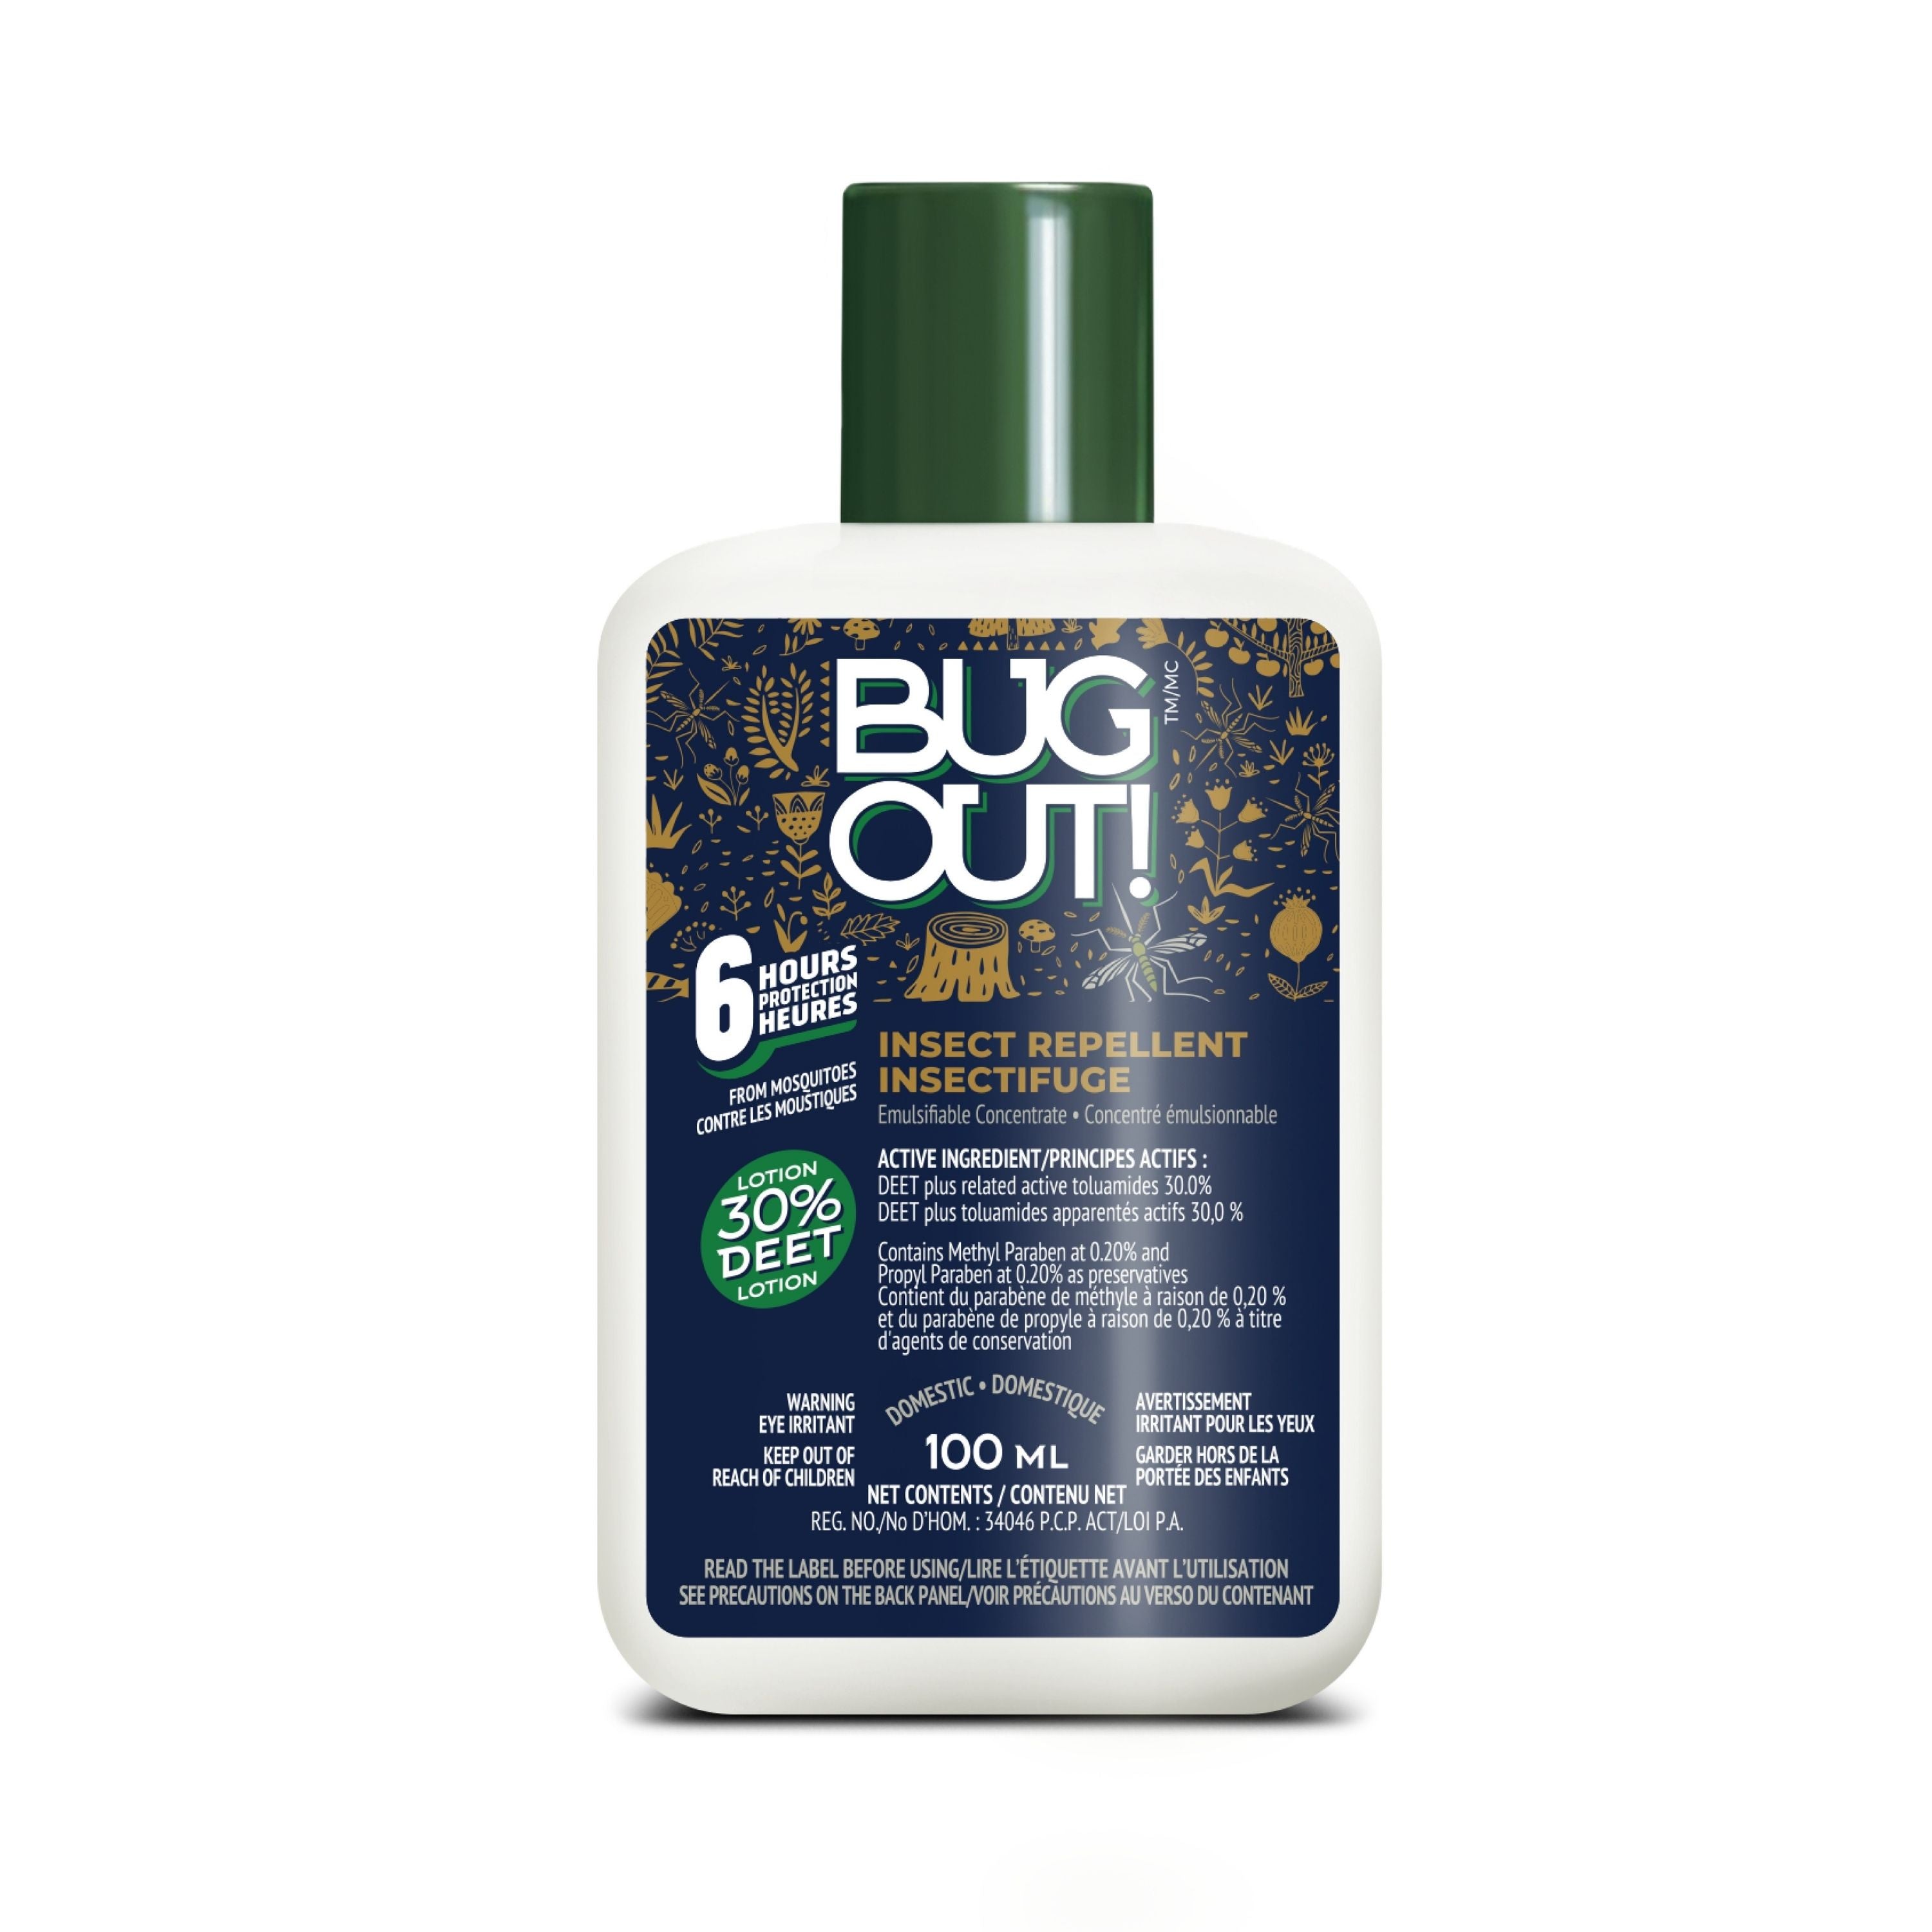 Lotion insectifuge - 30% deet||Insect repellent lotion - 30% deet